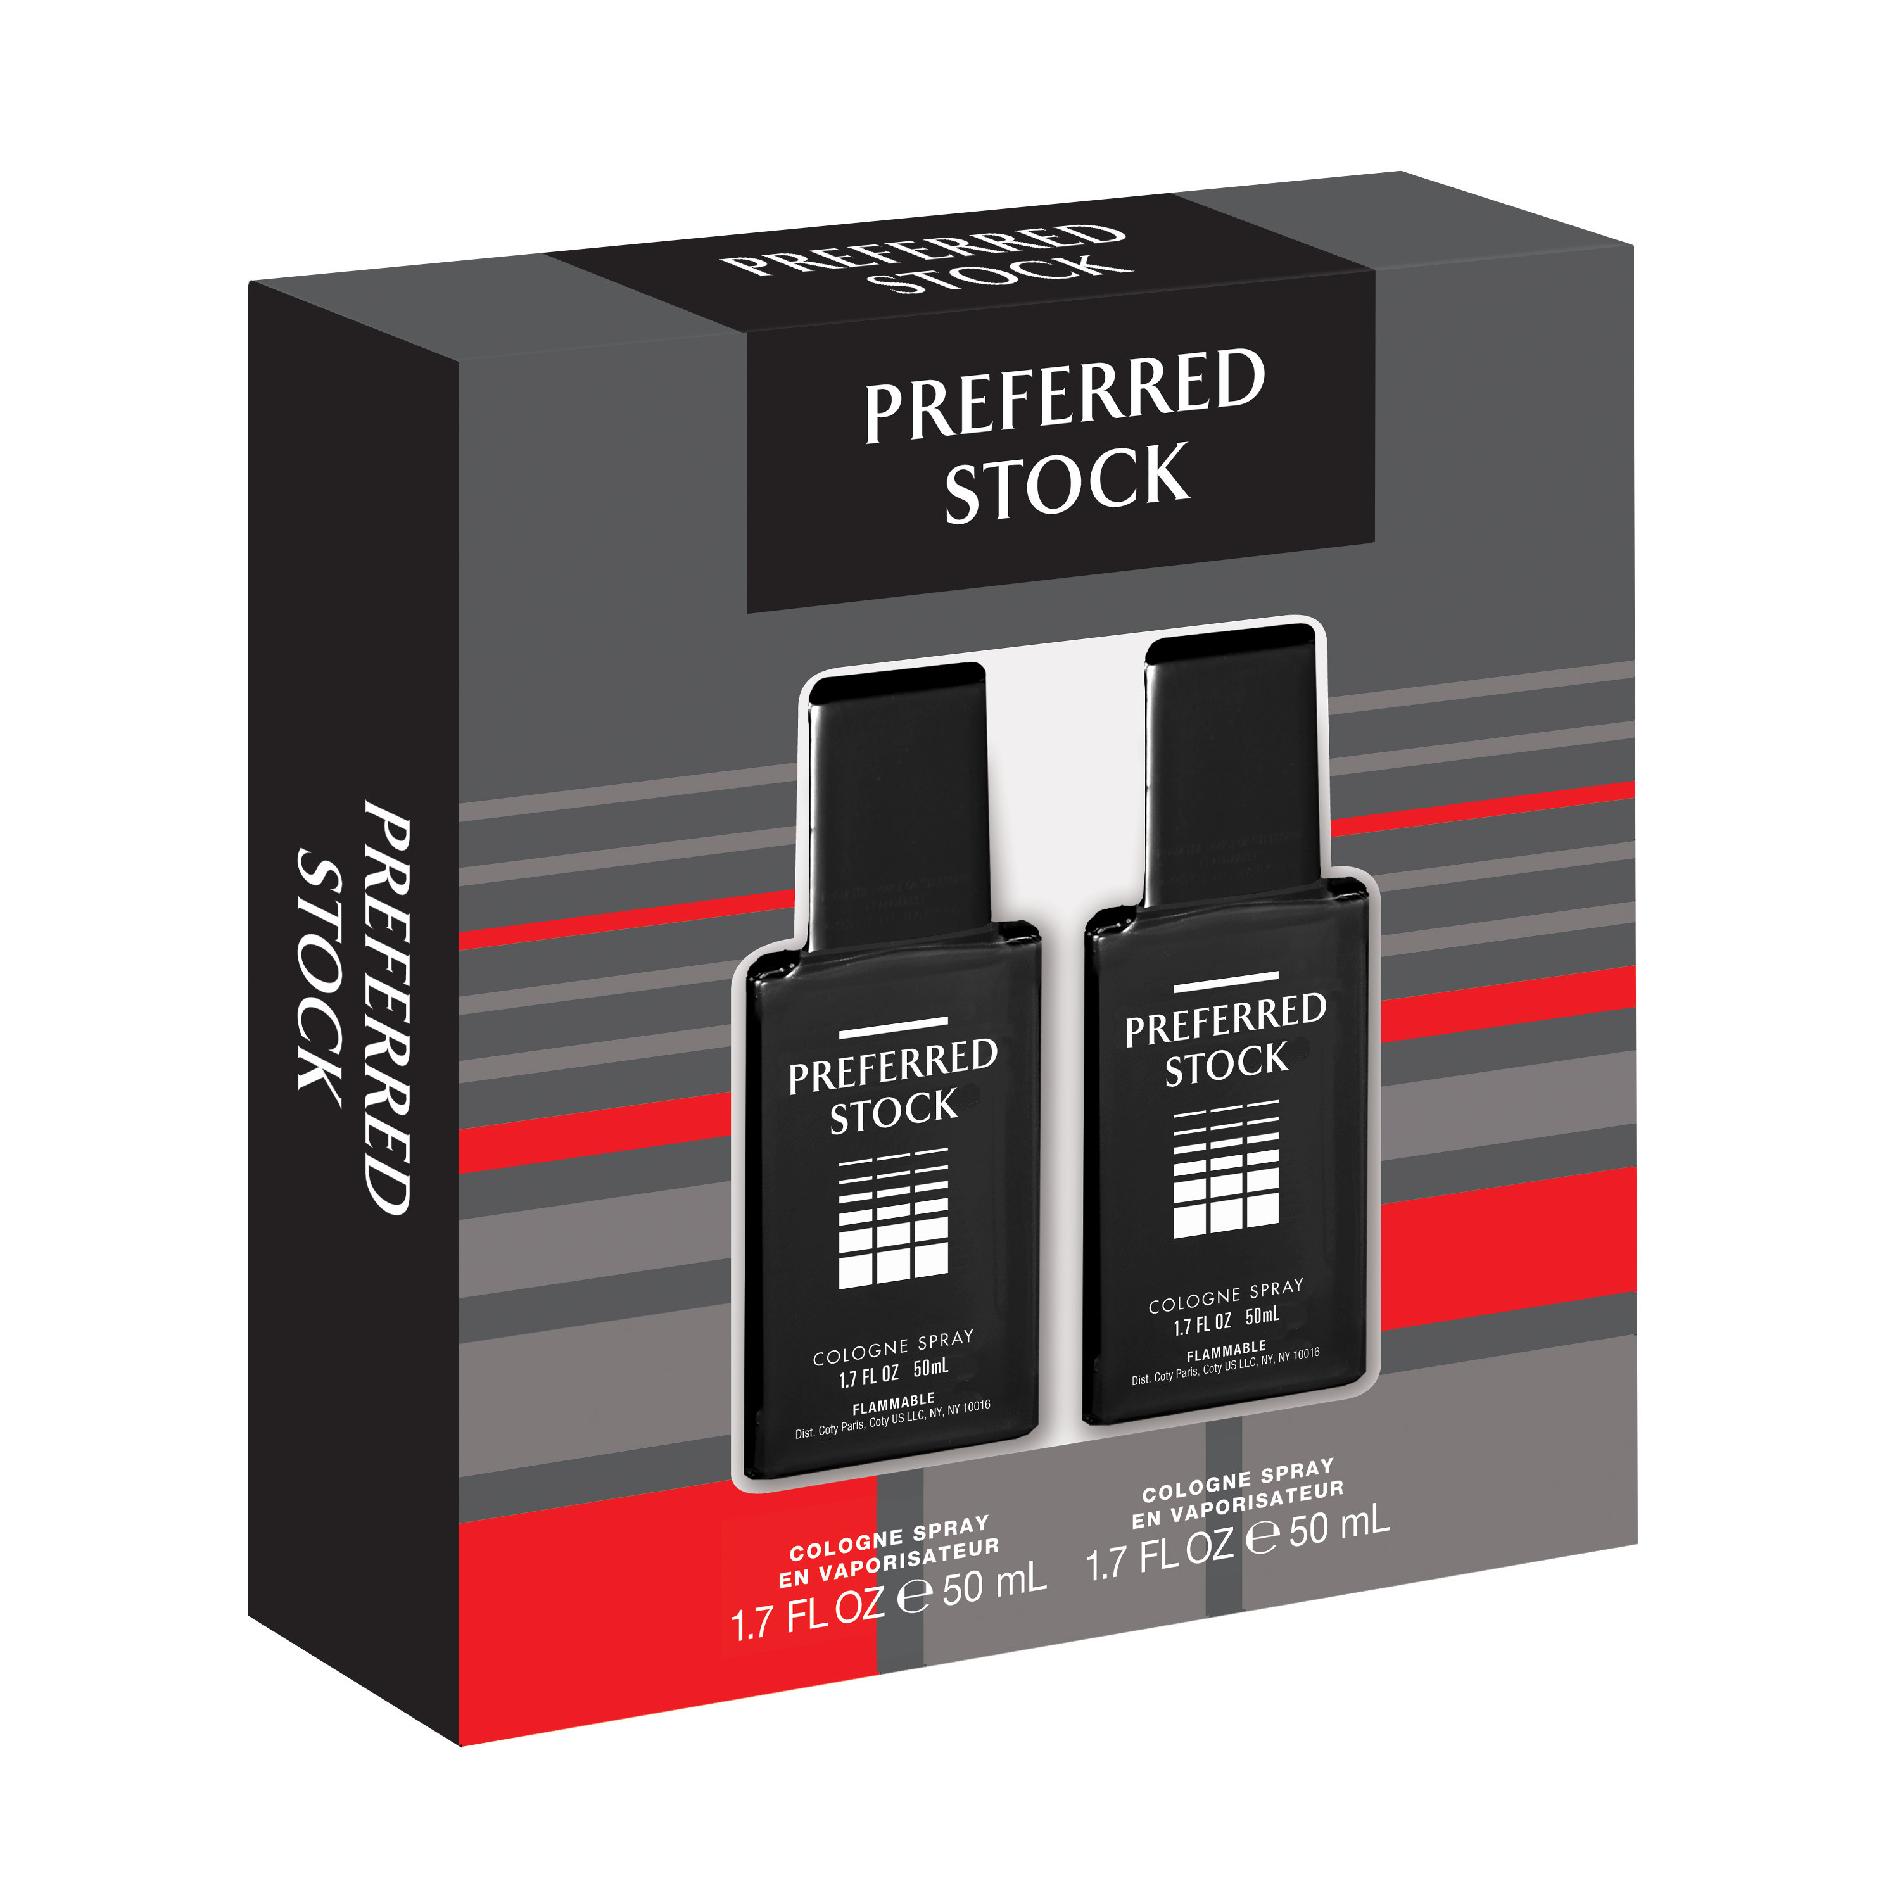 Preferred Stock Gift Sets for Men, 2 Piece